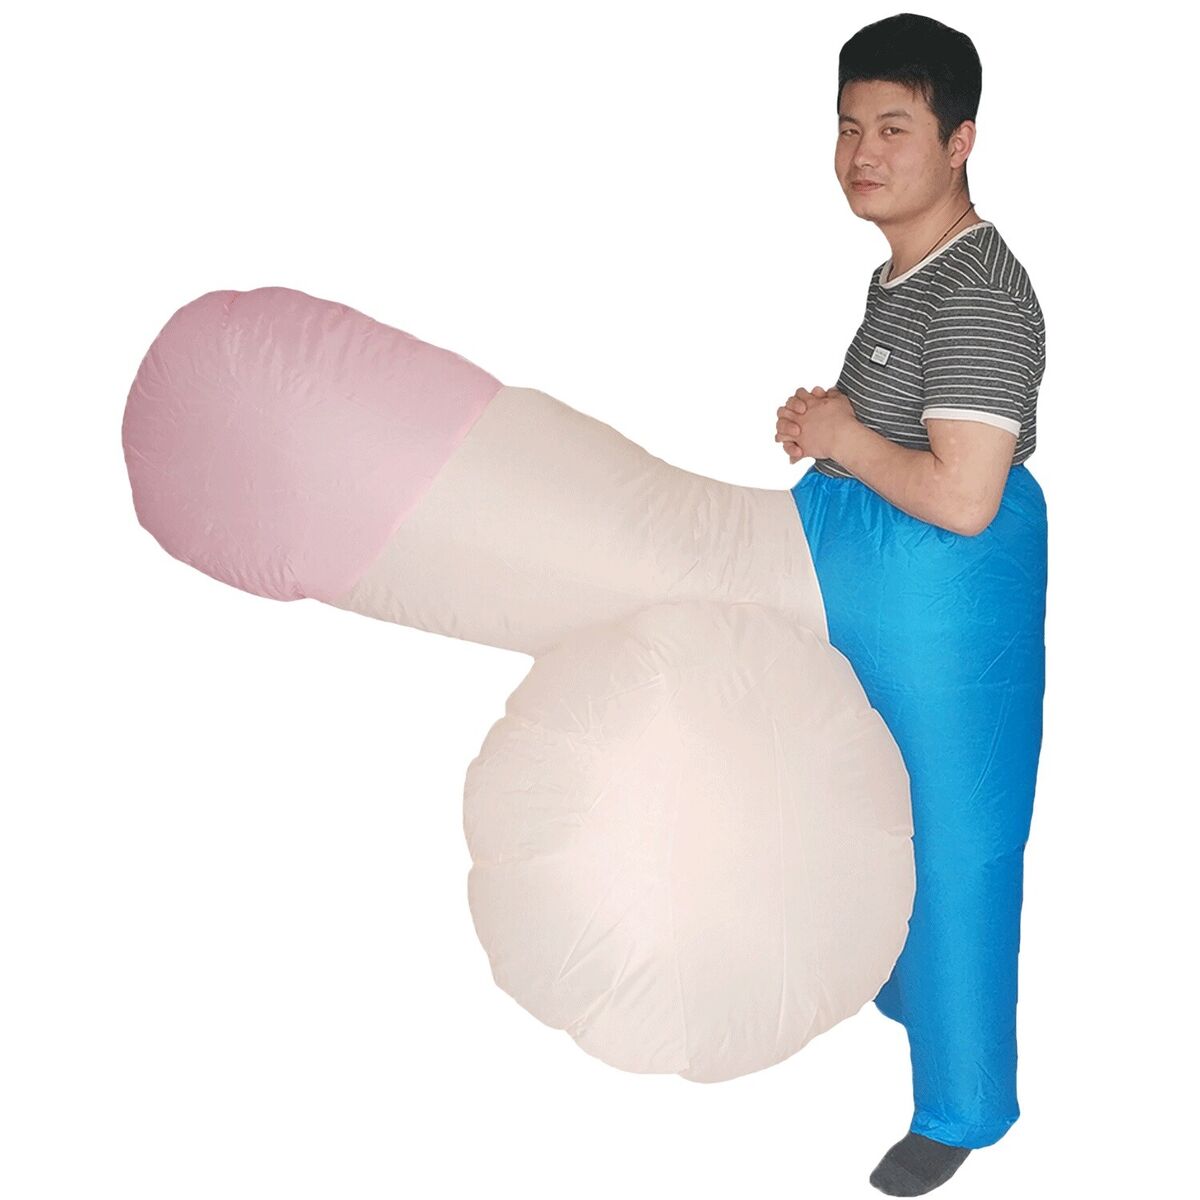 adam wei recommends giant penis halloween costume pic